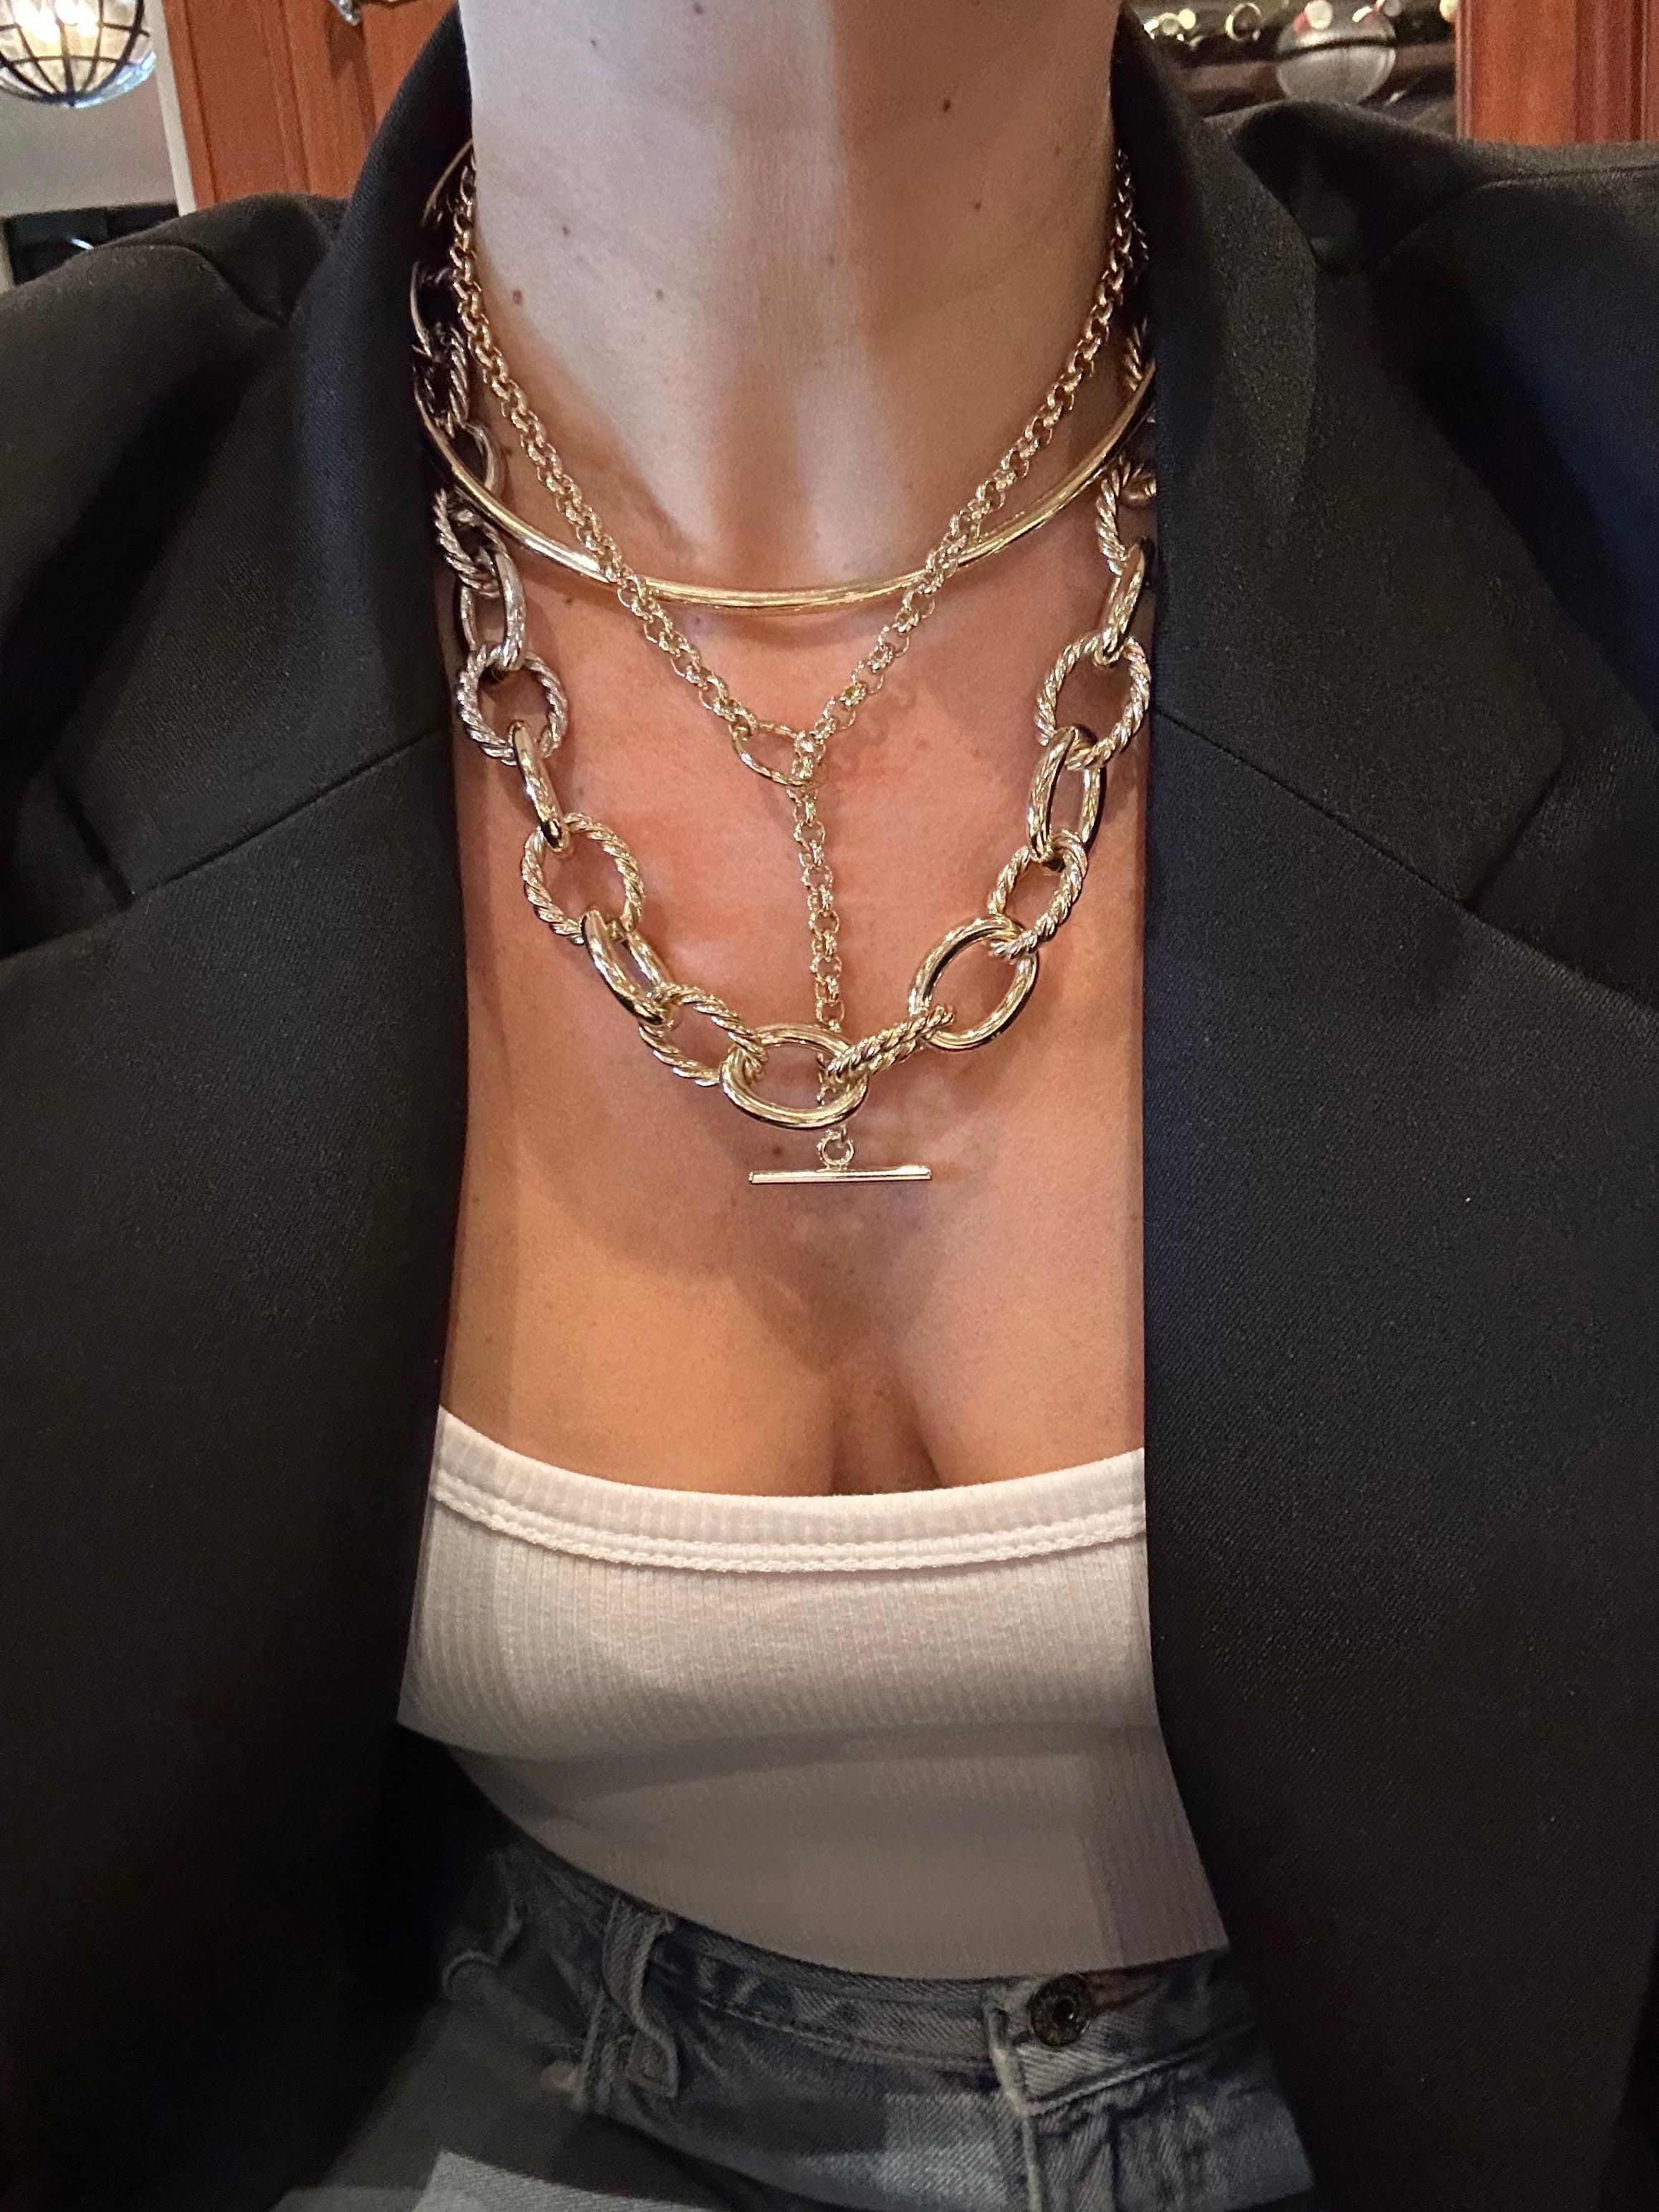 a close up of a person wearing a jacket and a necklace